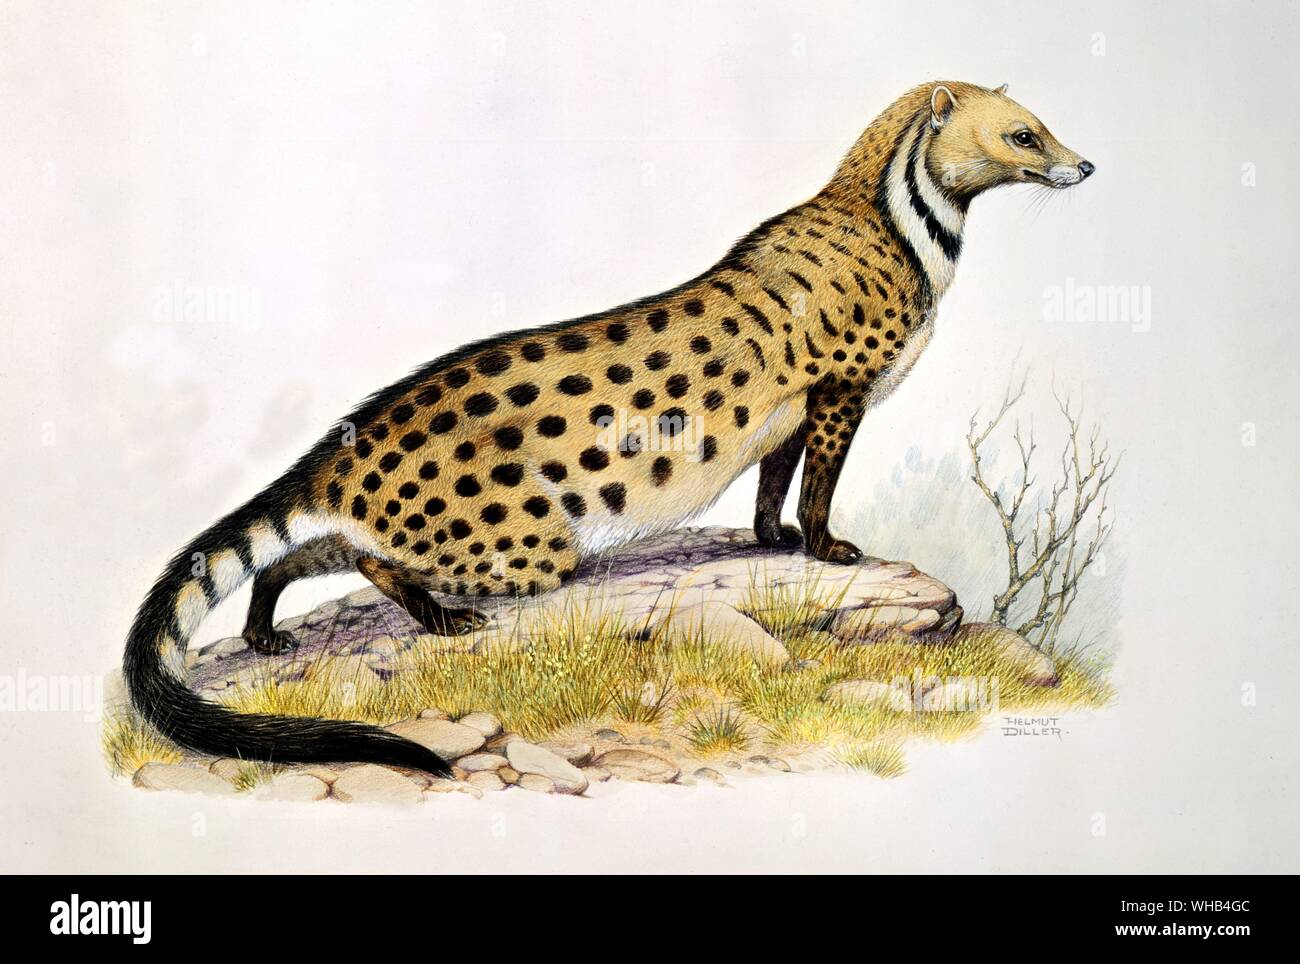 The Travancore race of the large spotted civet (South India) - drawing by Helmut Diller. Stock Photo